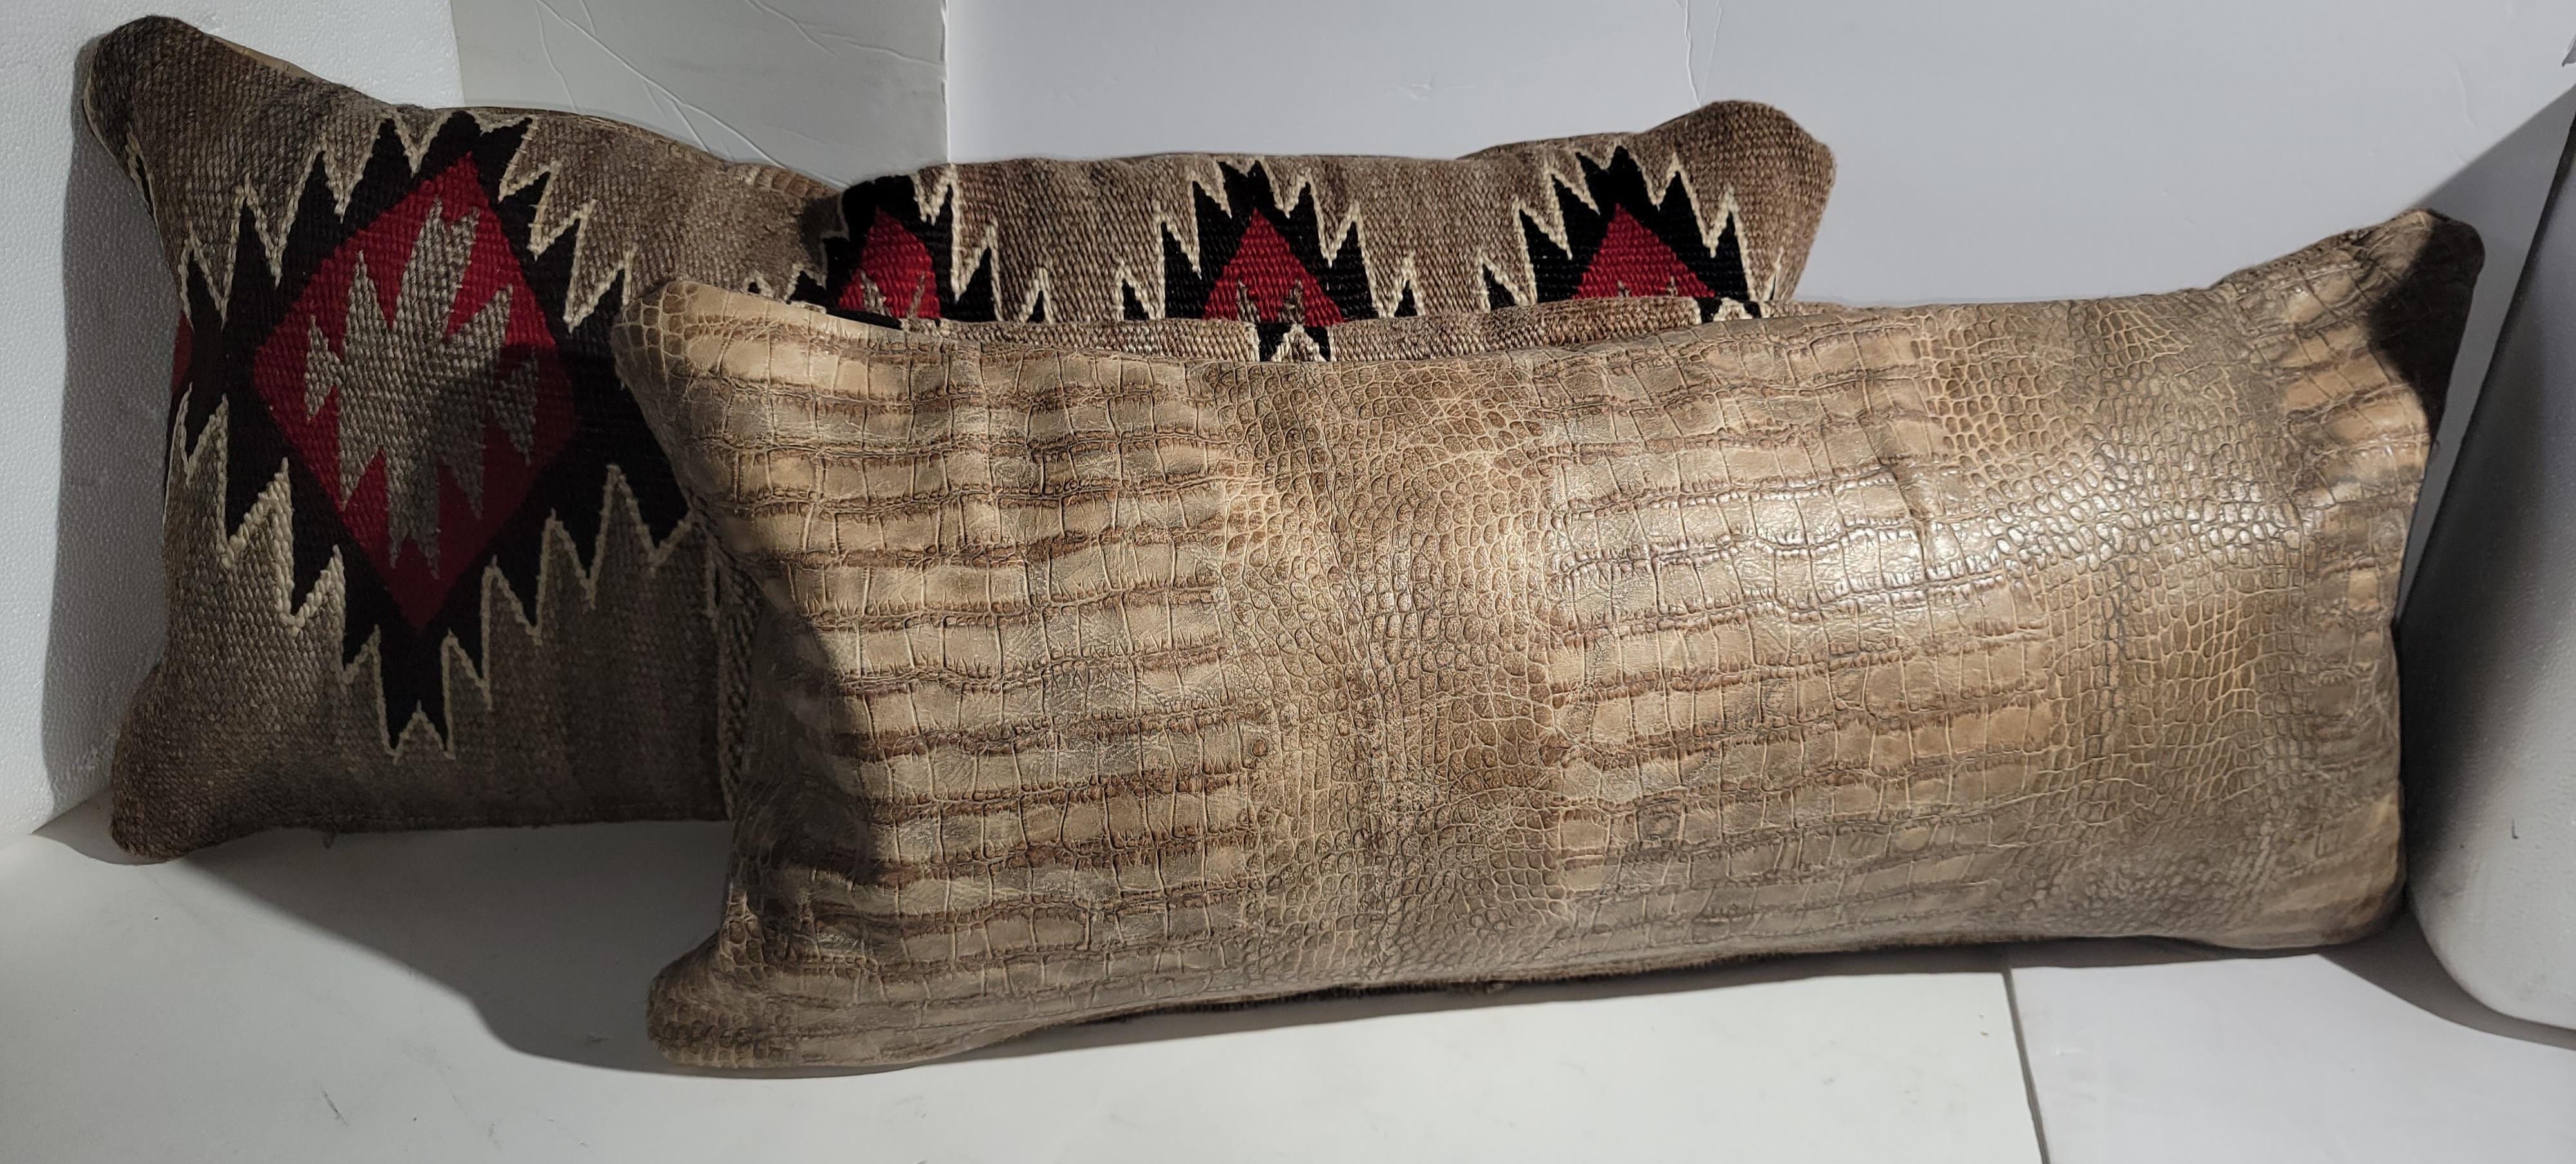 20th Century 19Thc Navajo Indian Weaving Bolster Pillows -2 For Sale